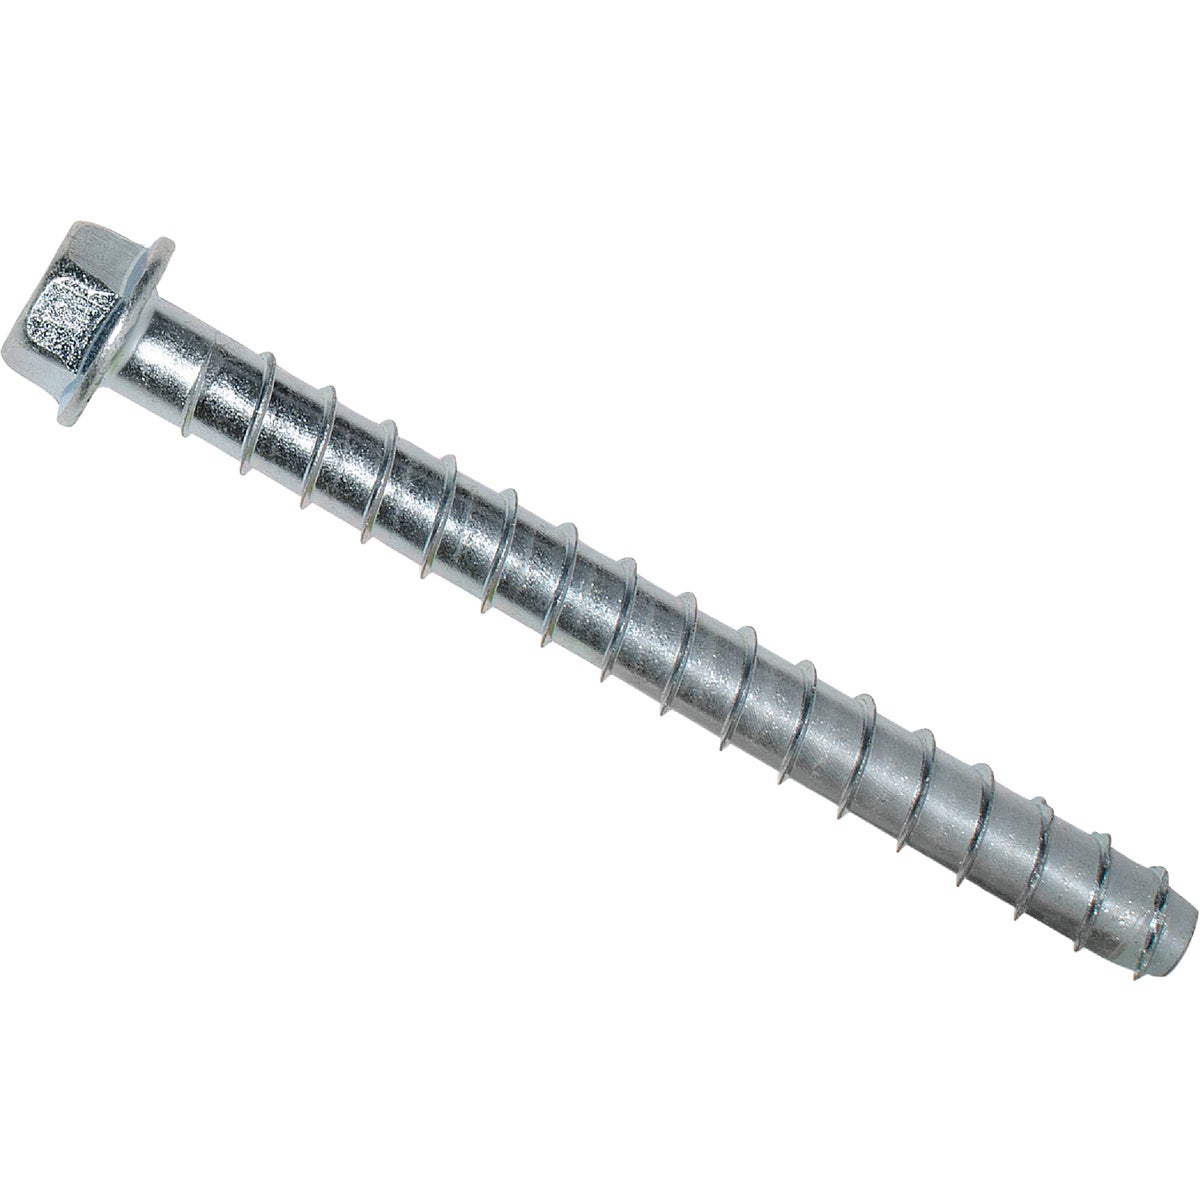 Item 200931, The Titen HD anchor is a high-strength screw anchor for concrete and 